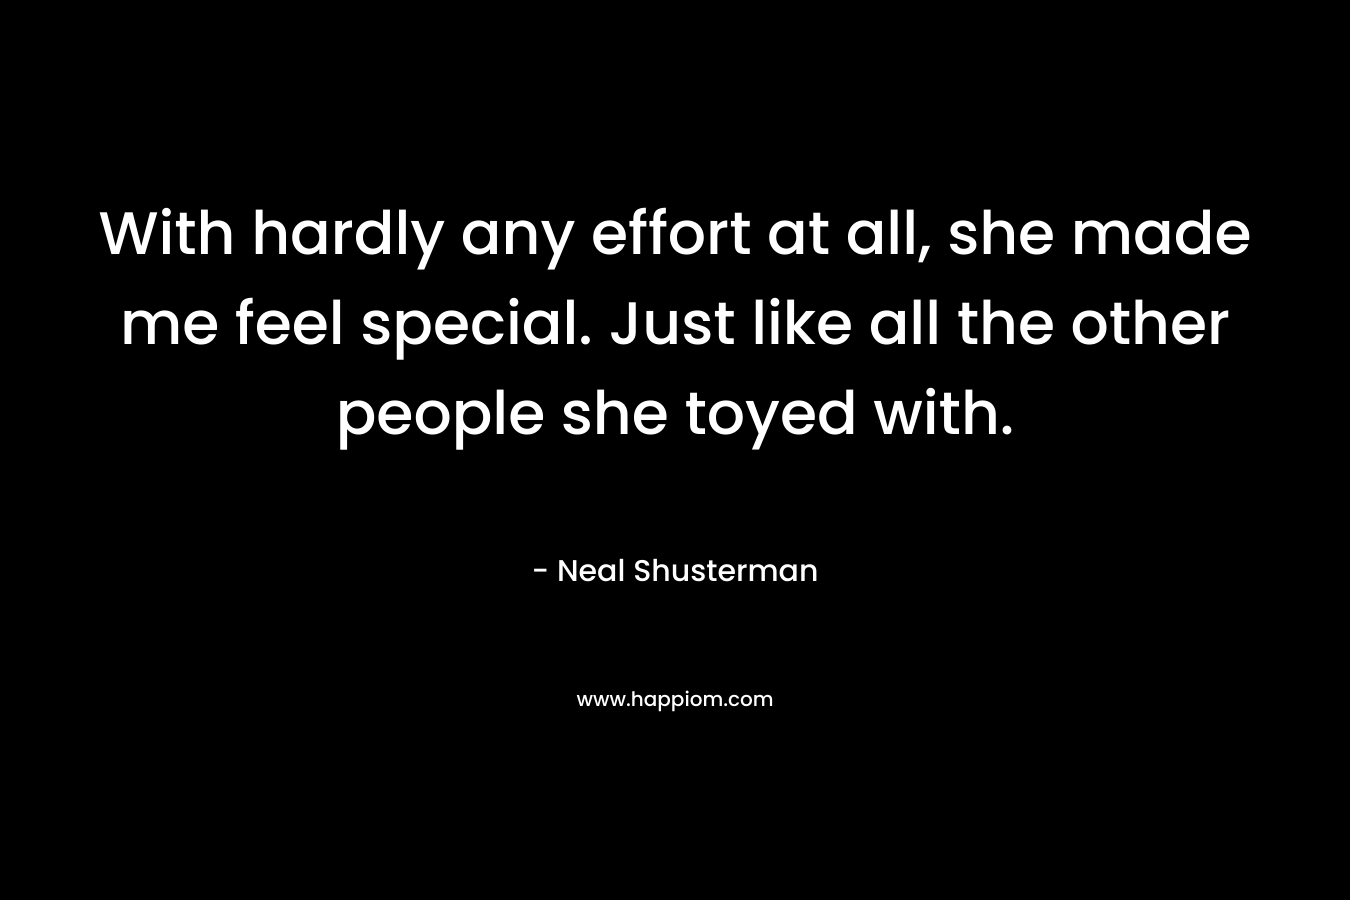 With hardly any effort at all, she made me feel special. Just like all the other people she toyed with. – Neal Shusterman